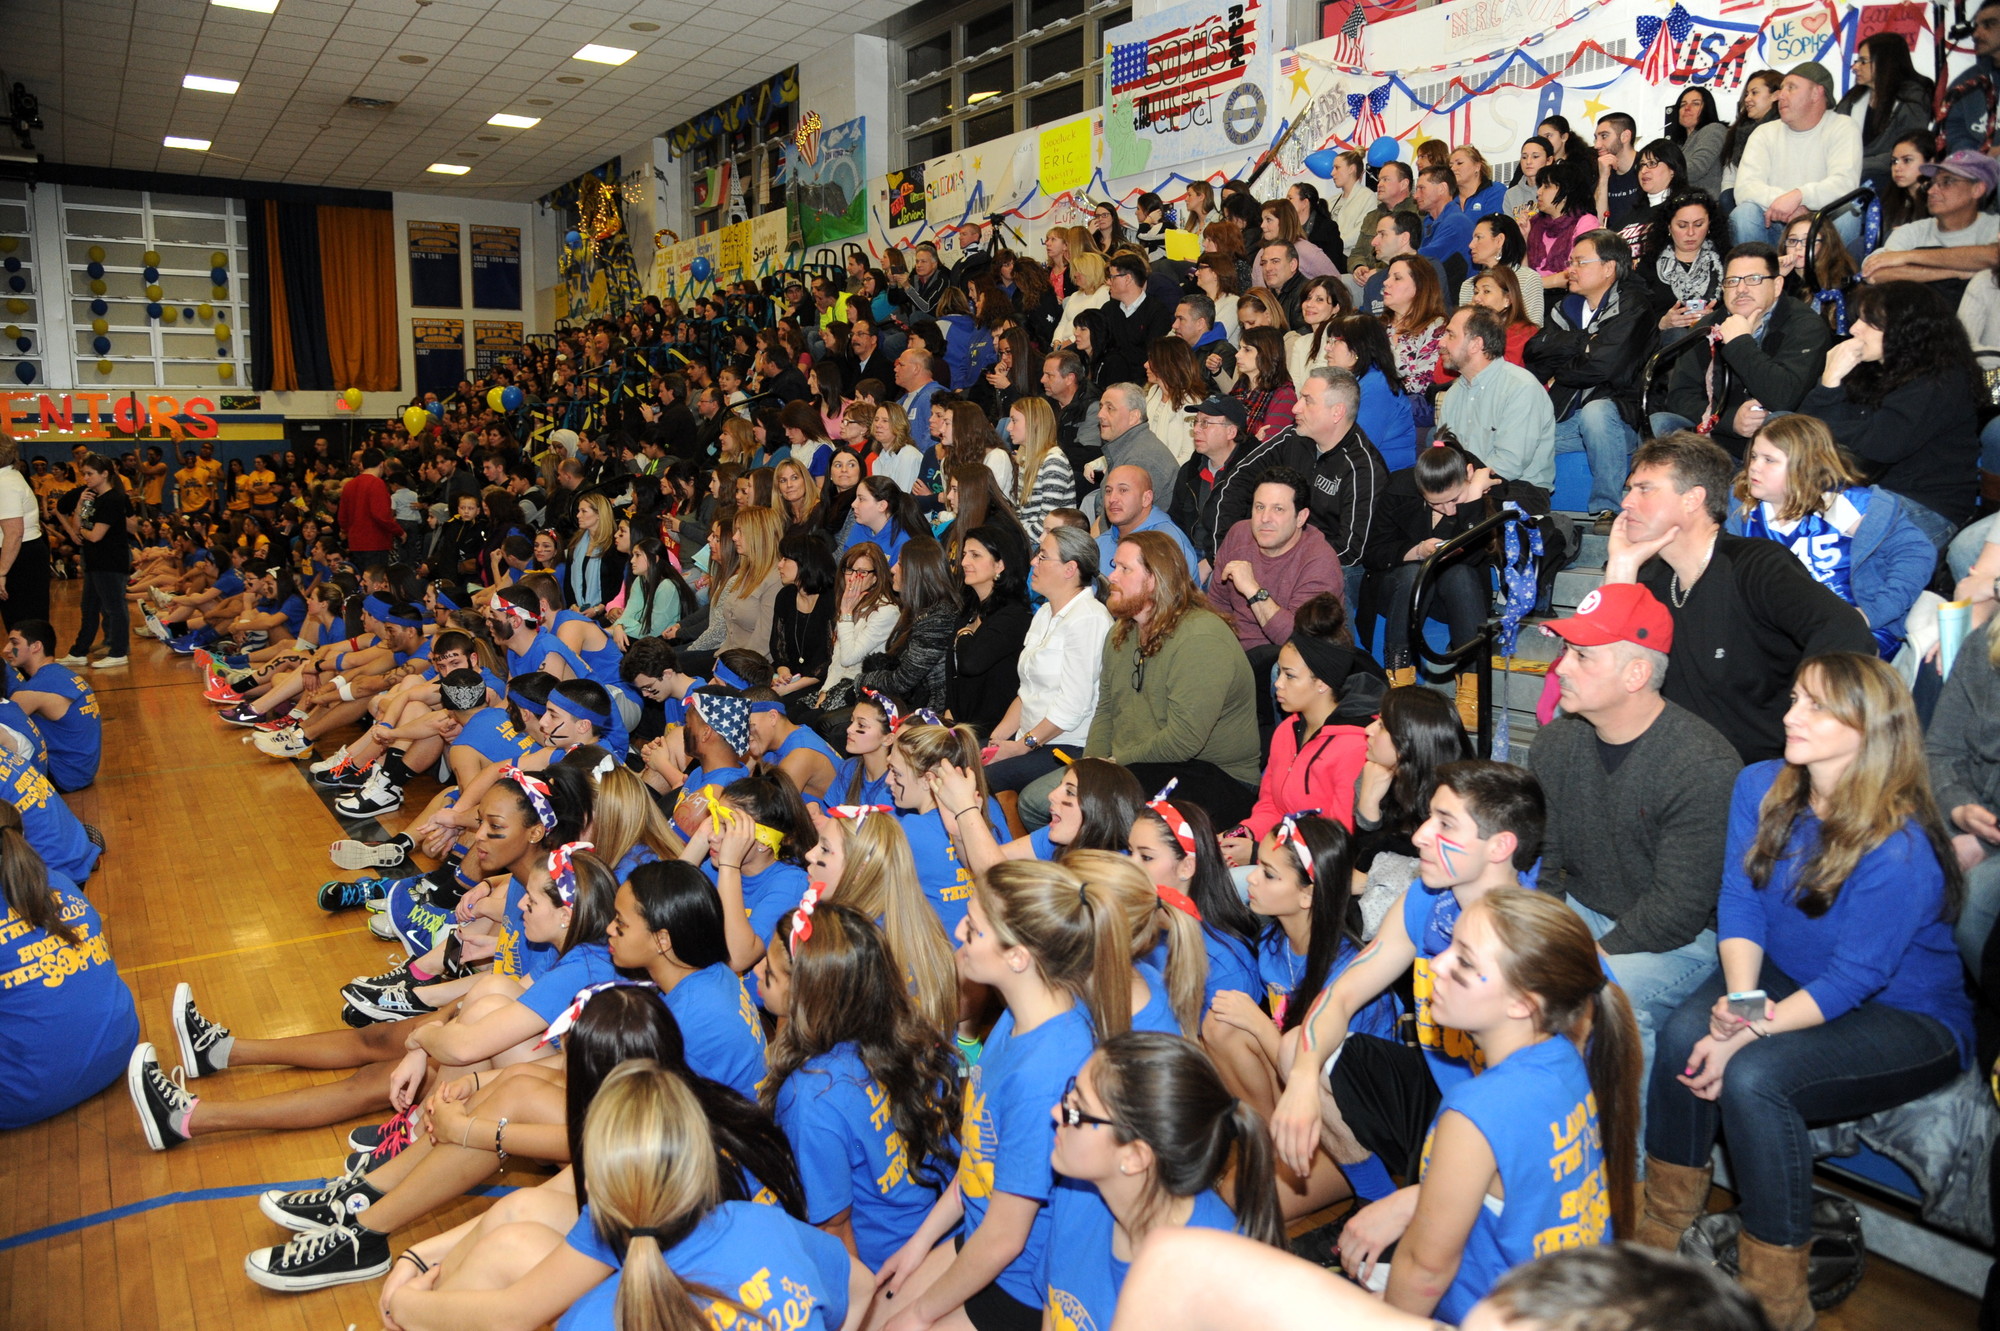 Hundreds packed the gym at East Meadow High School last Friday to watch the friendly competition.